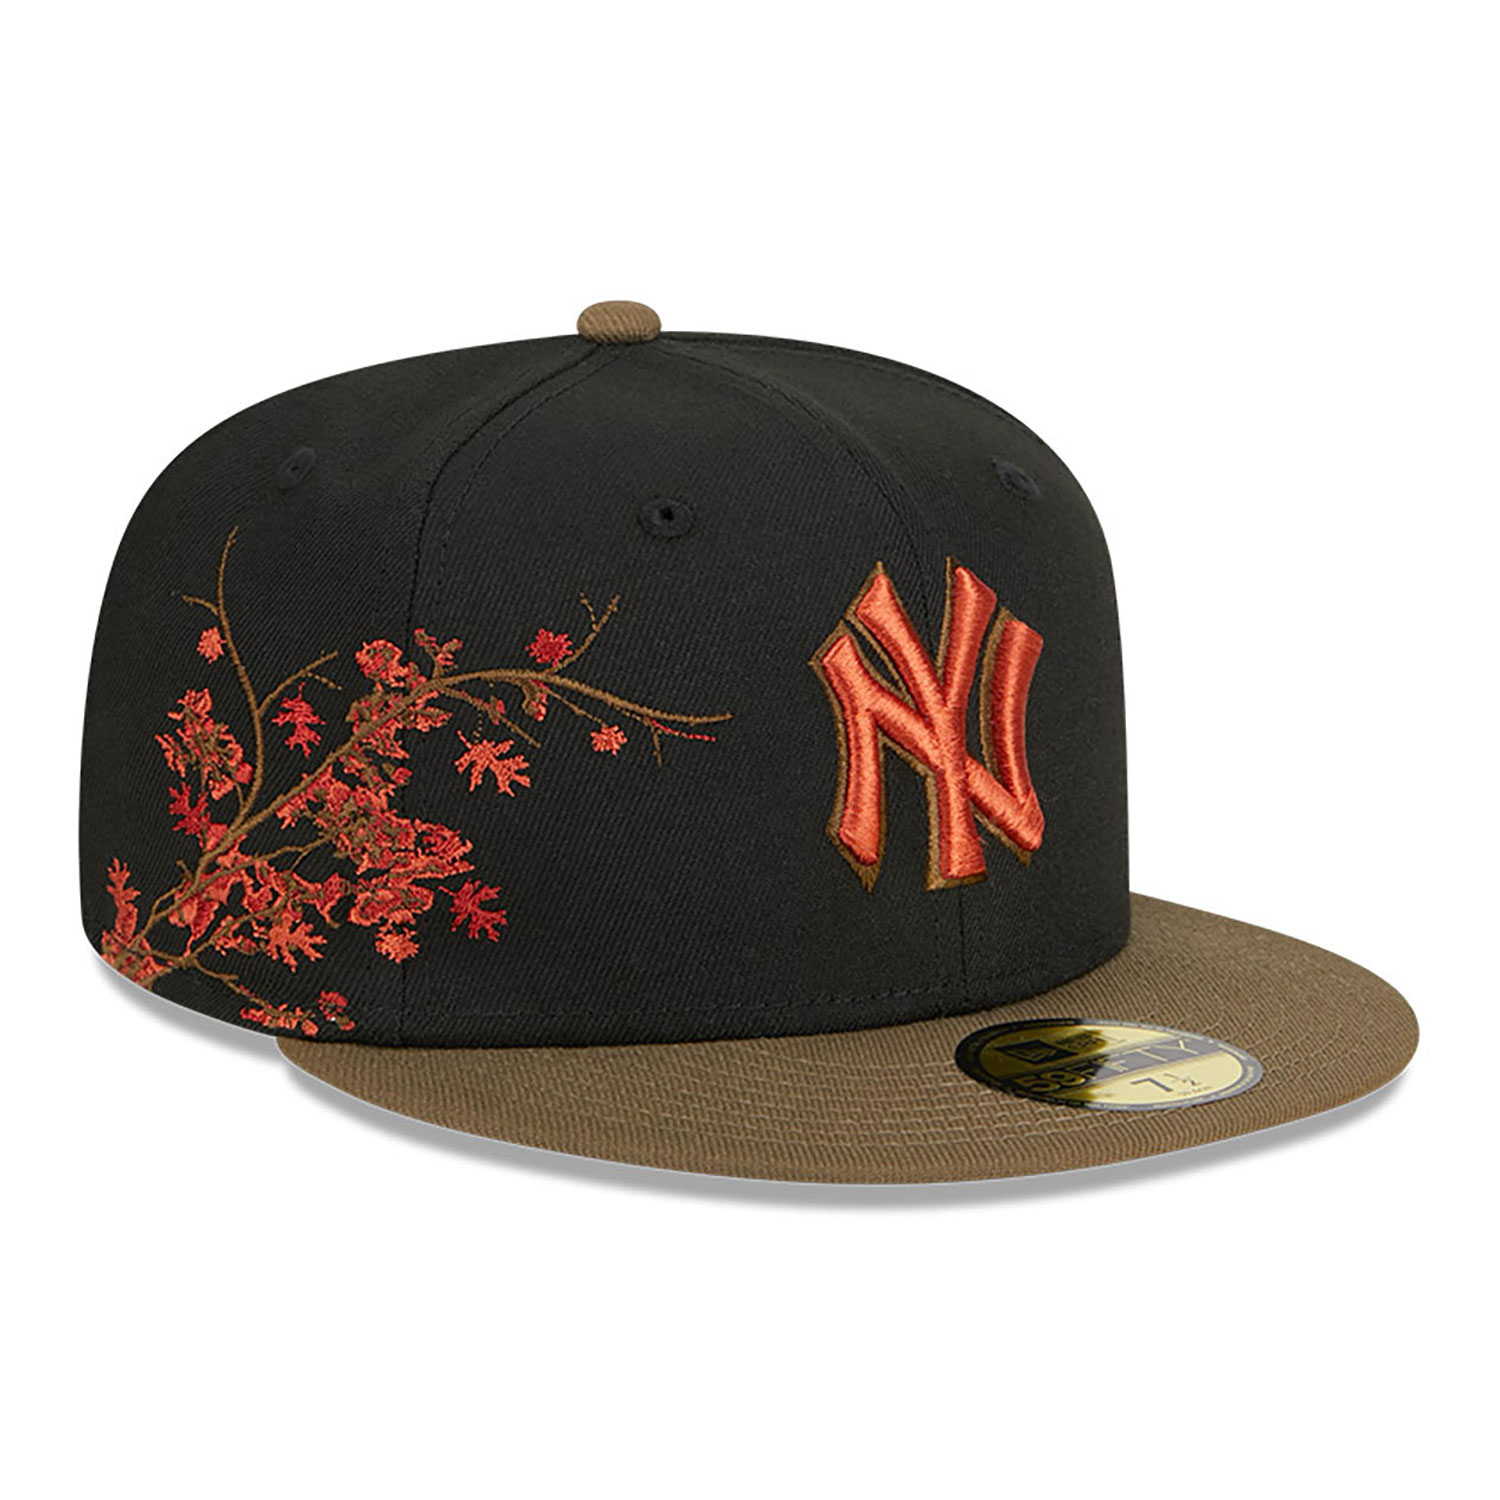 New York Yankees Rustic Fall Black 59FIFTY Fitted Cap